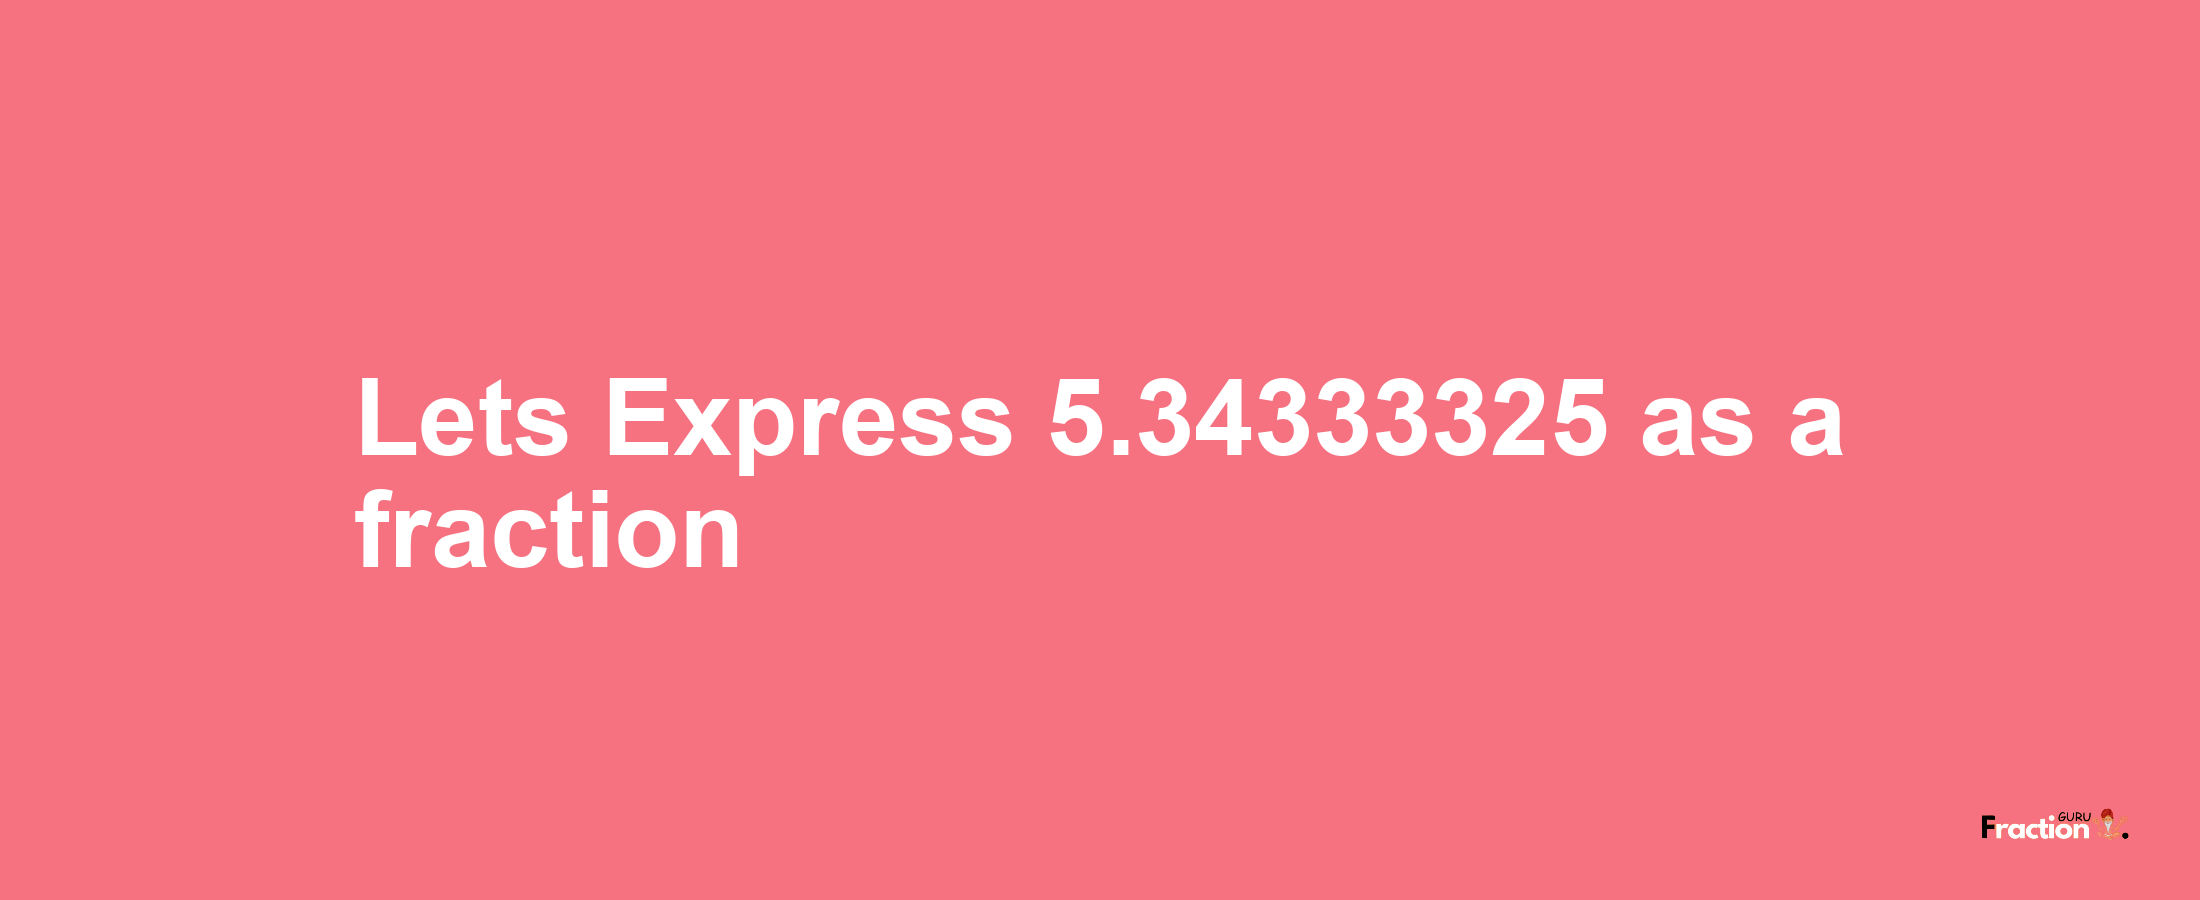 Lets Express 5.34333325 as afraction